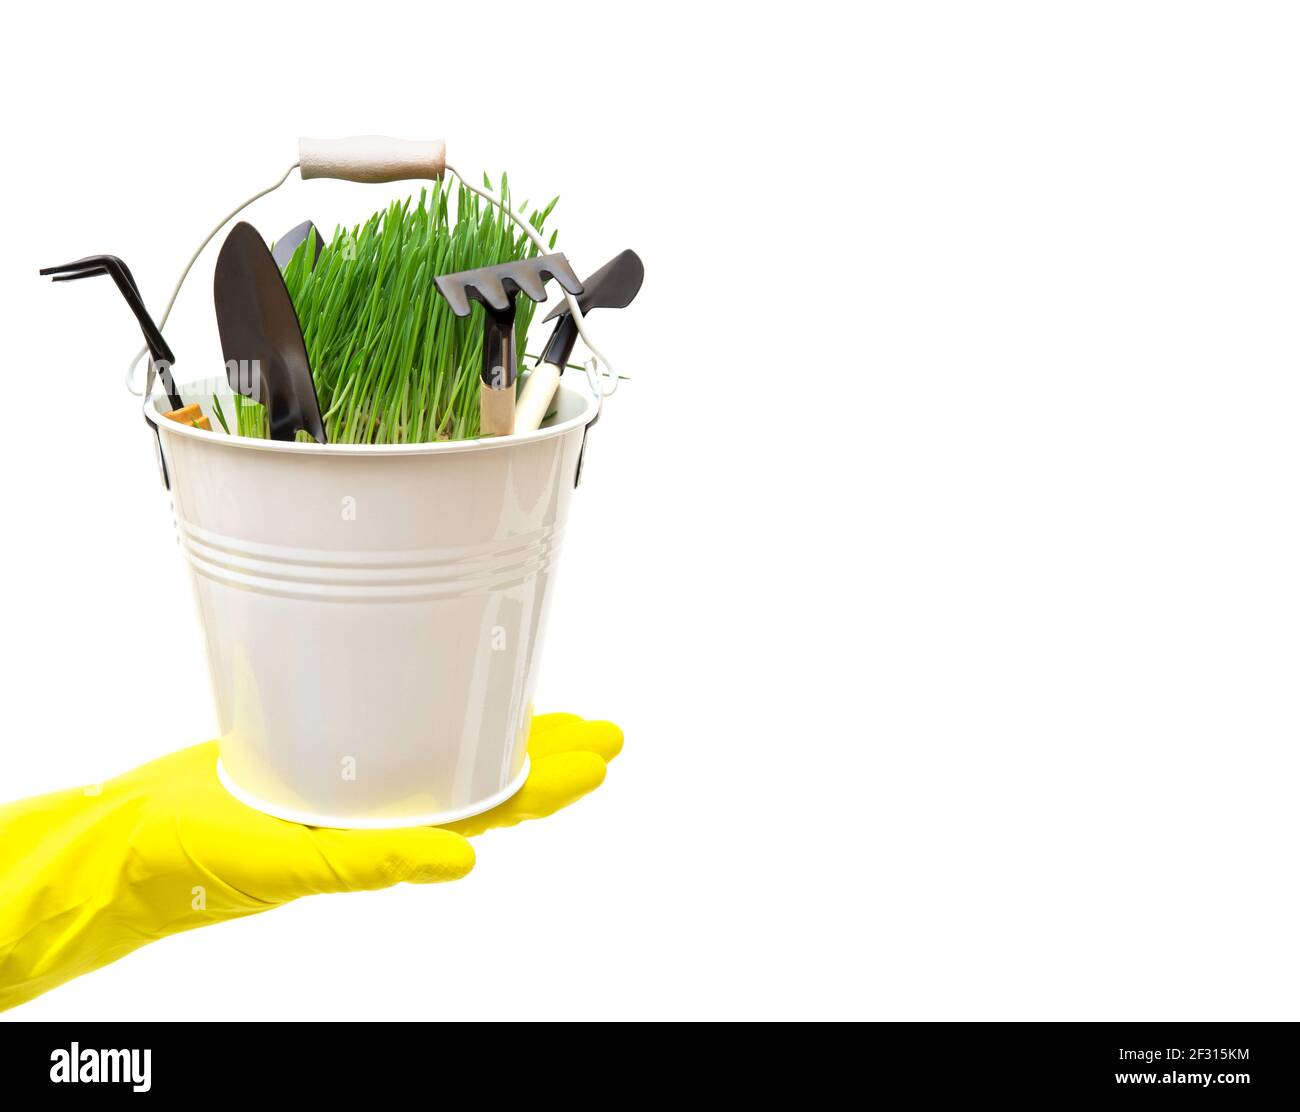 Small white bucket with a bunch of fresh green grass and some gardening hand tools standing on a human hand wearing a yellow garden glove. Stock Photo